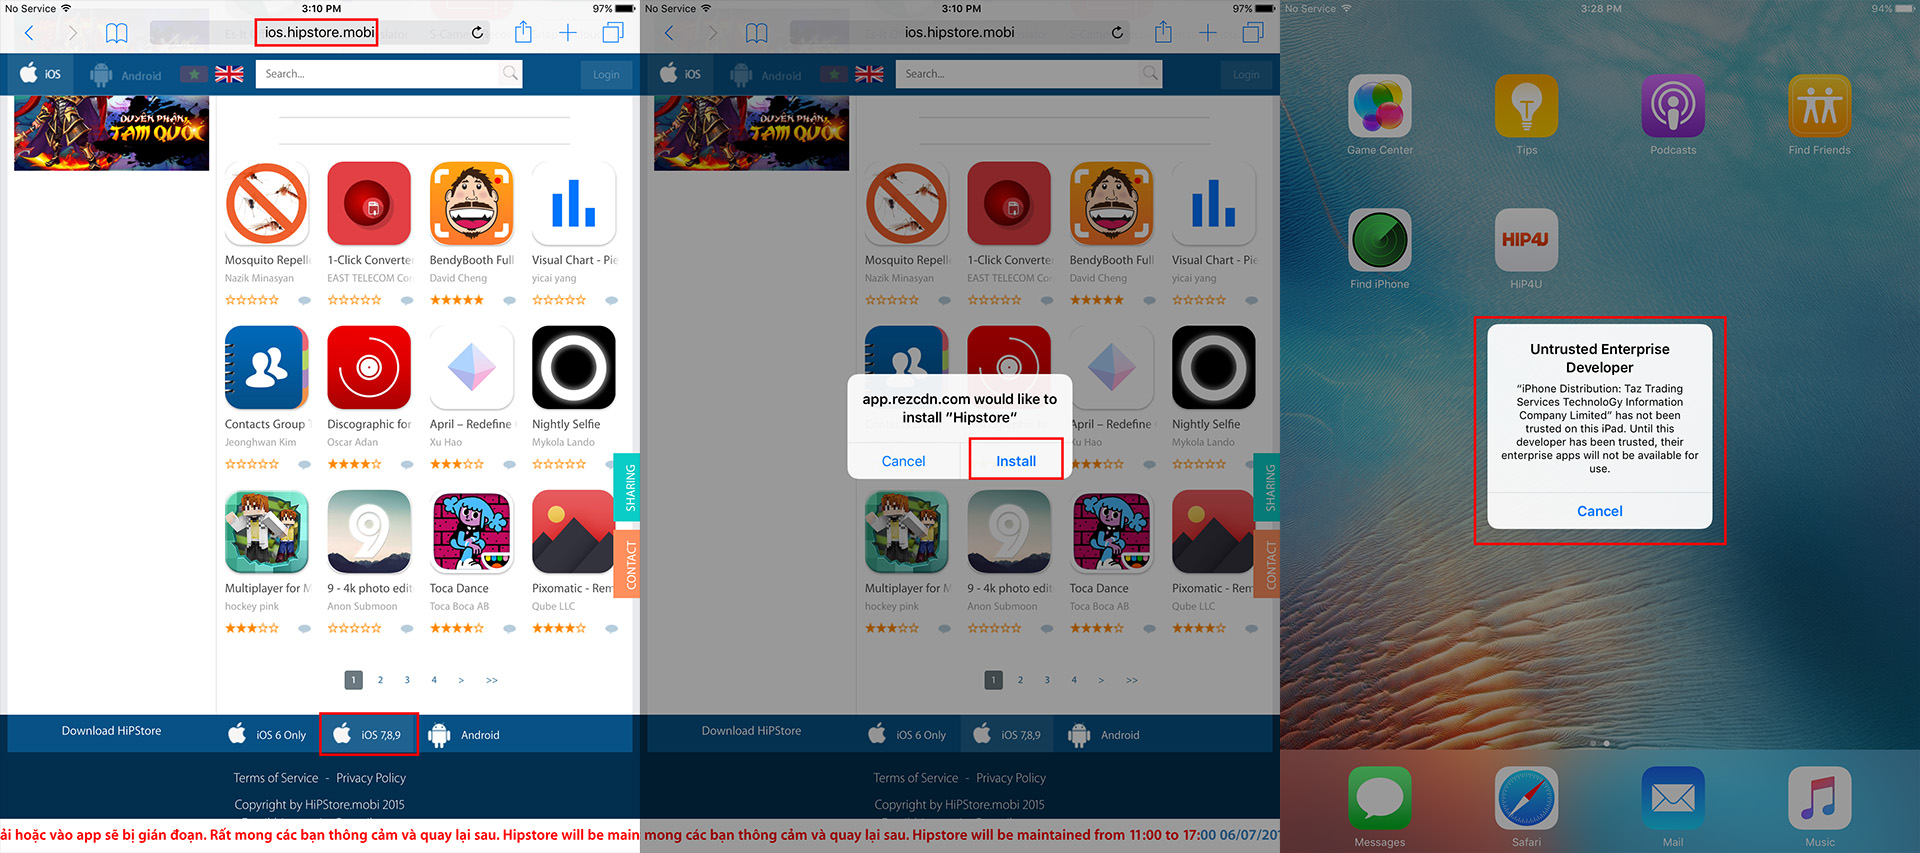 How to download apps without apple id